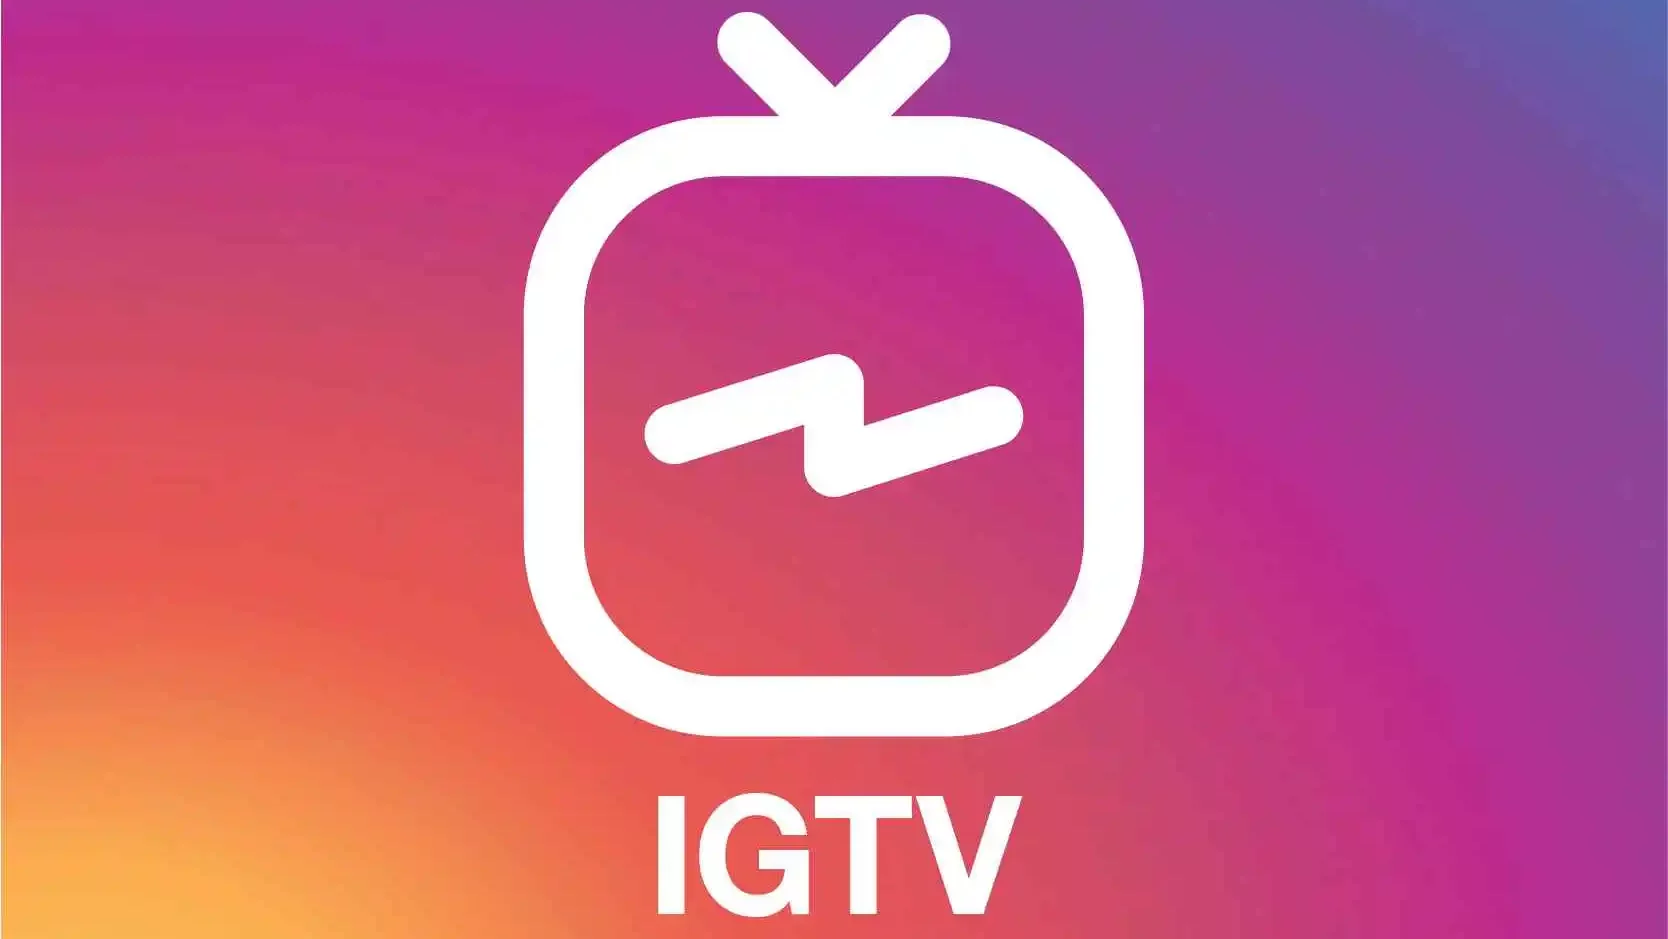 How To Post IGTV On Instagram 2022 And Can You Do It?